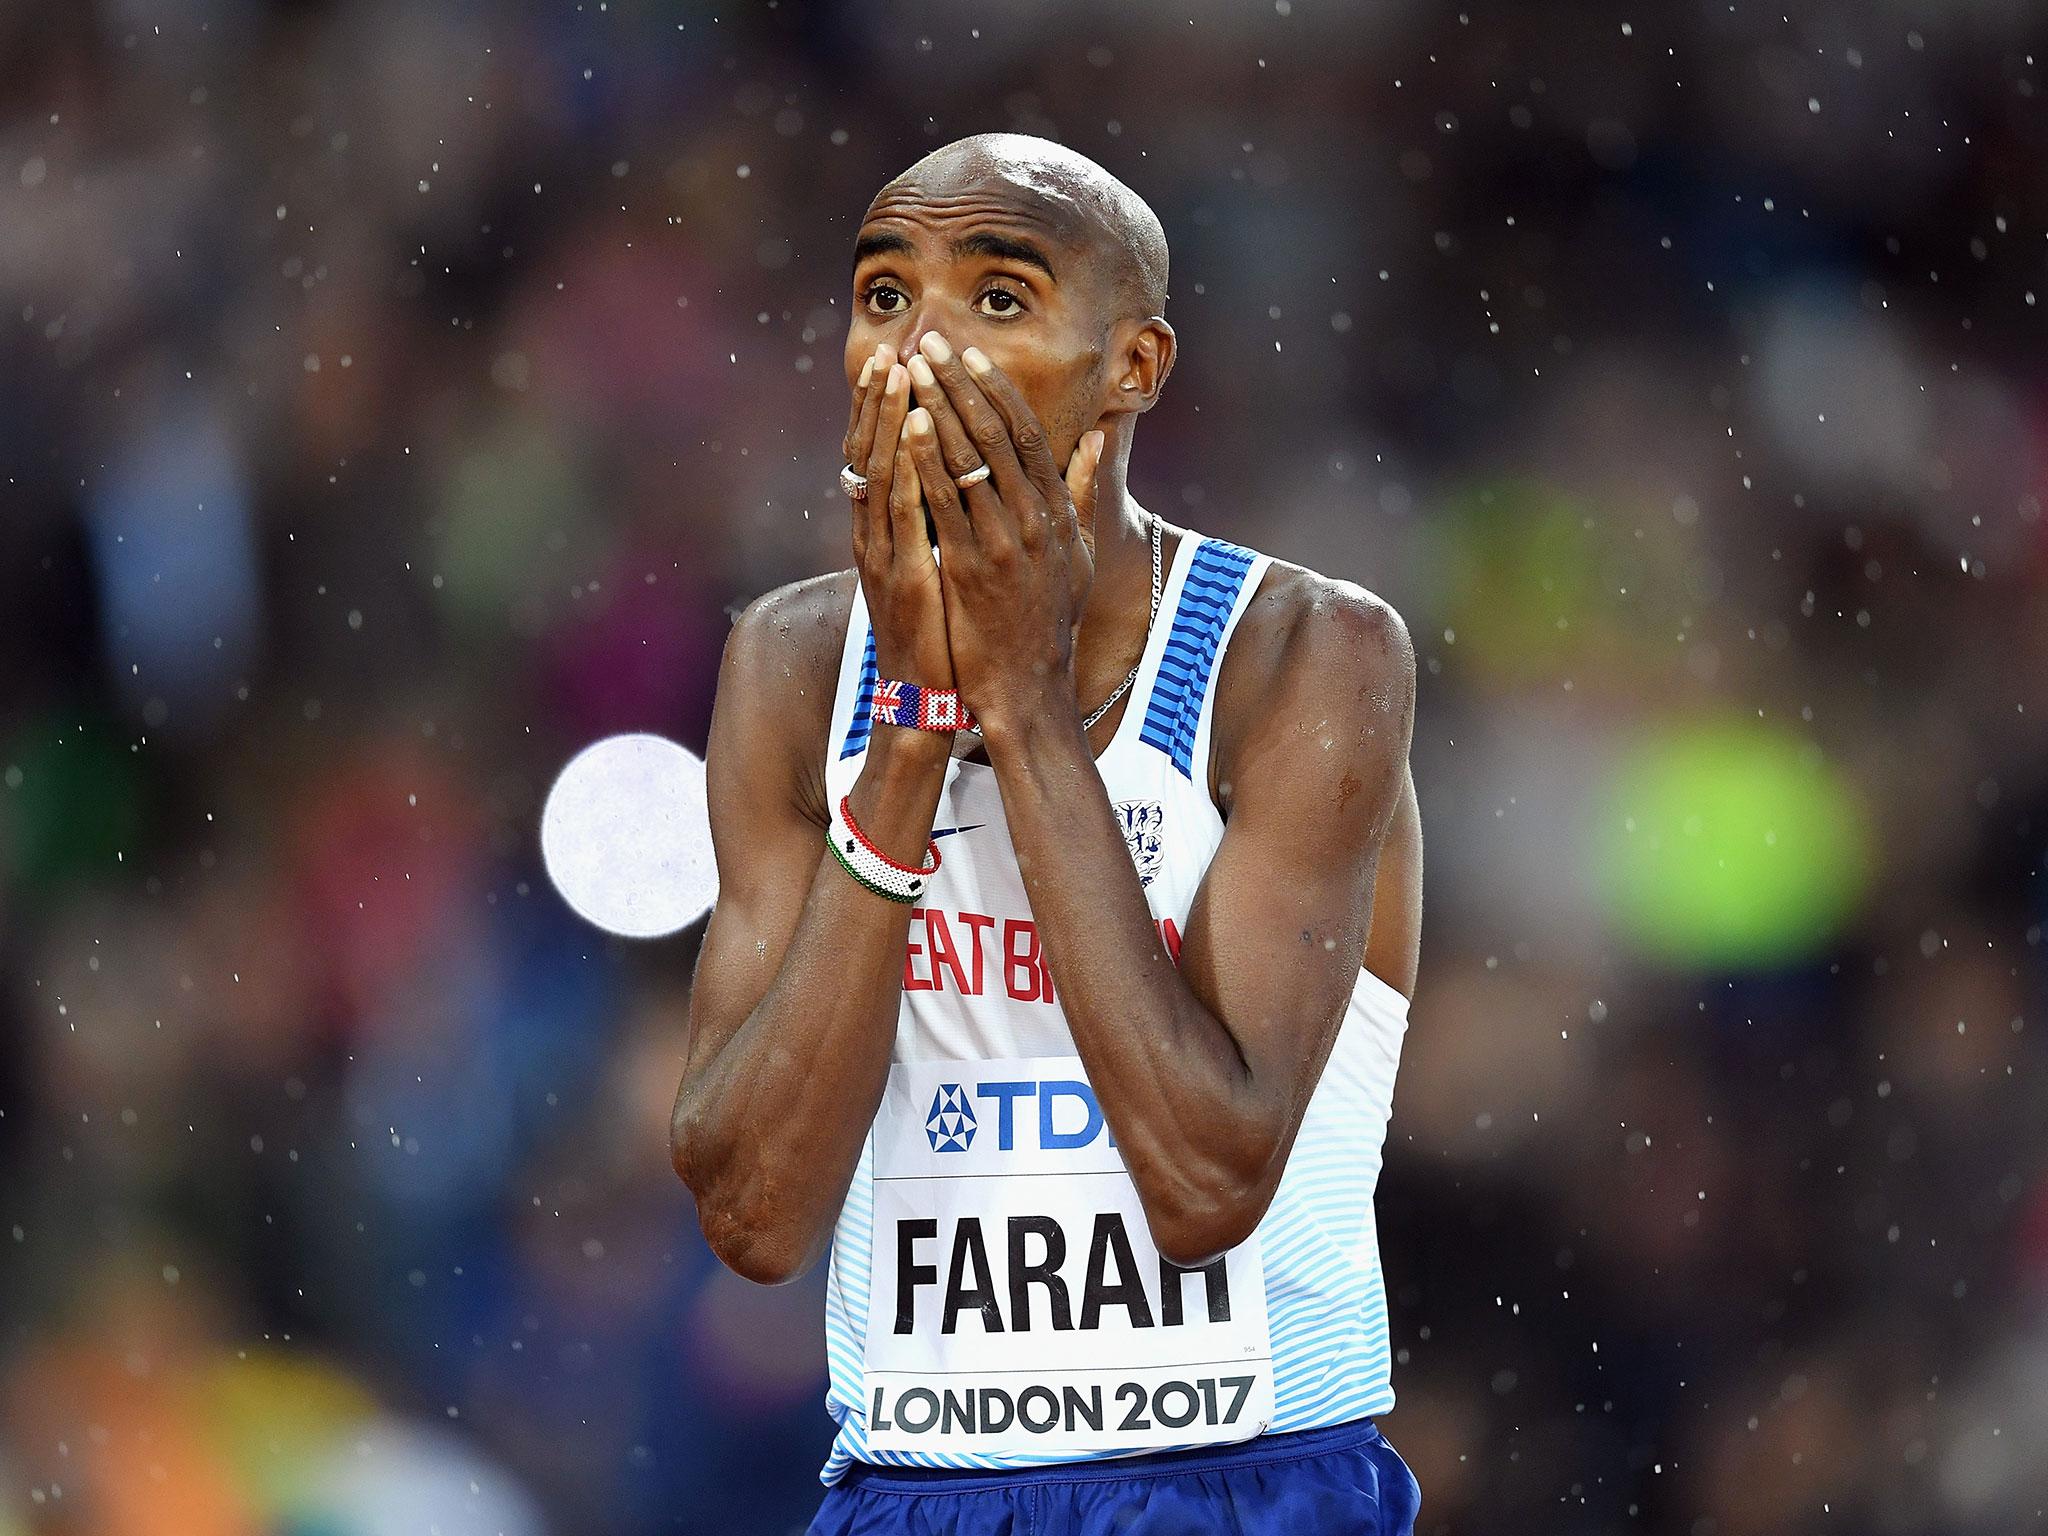 Mo Farah has admitted he is slightly 'beaten up' ahead of his third race at the World Athletics Championships